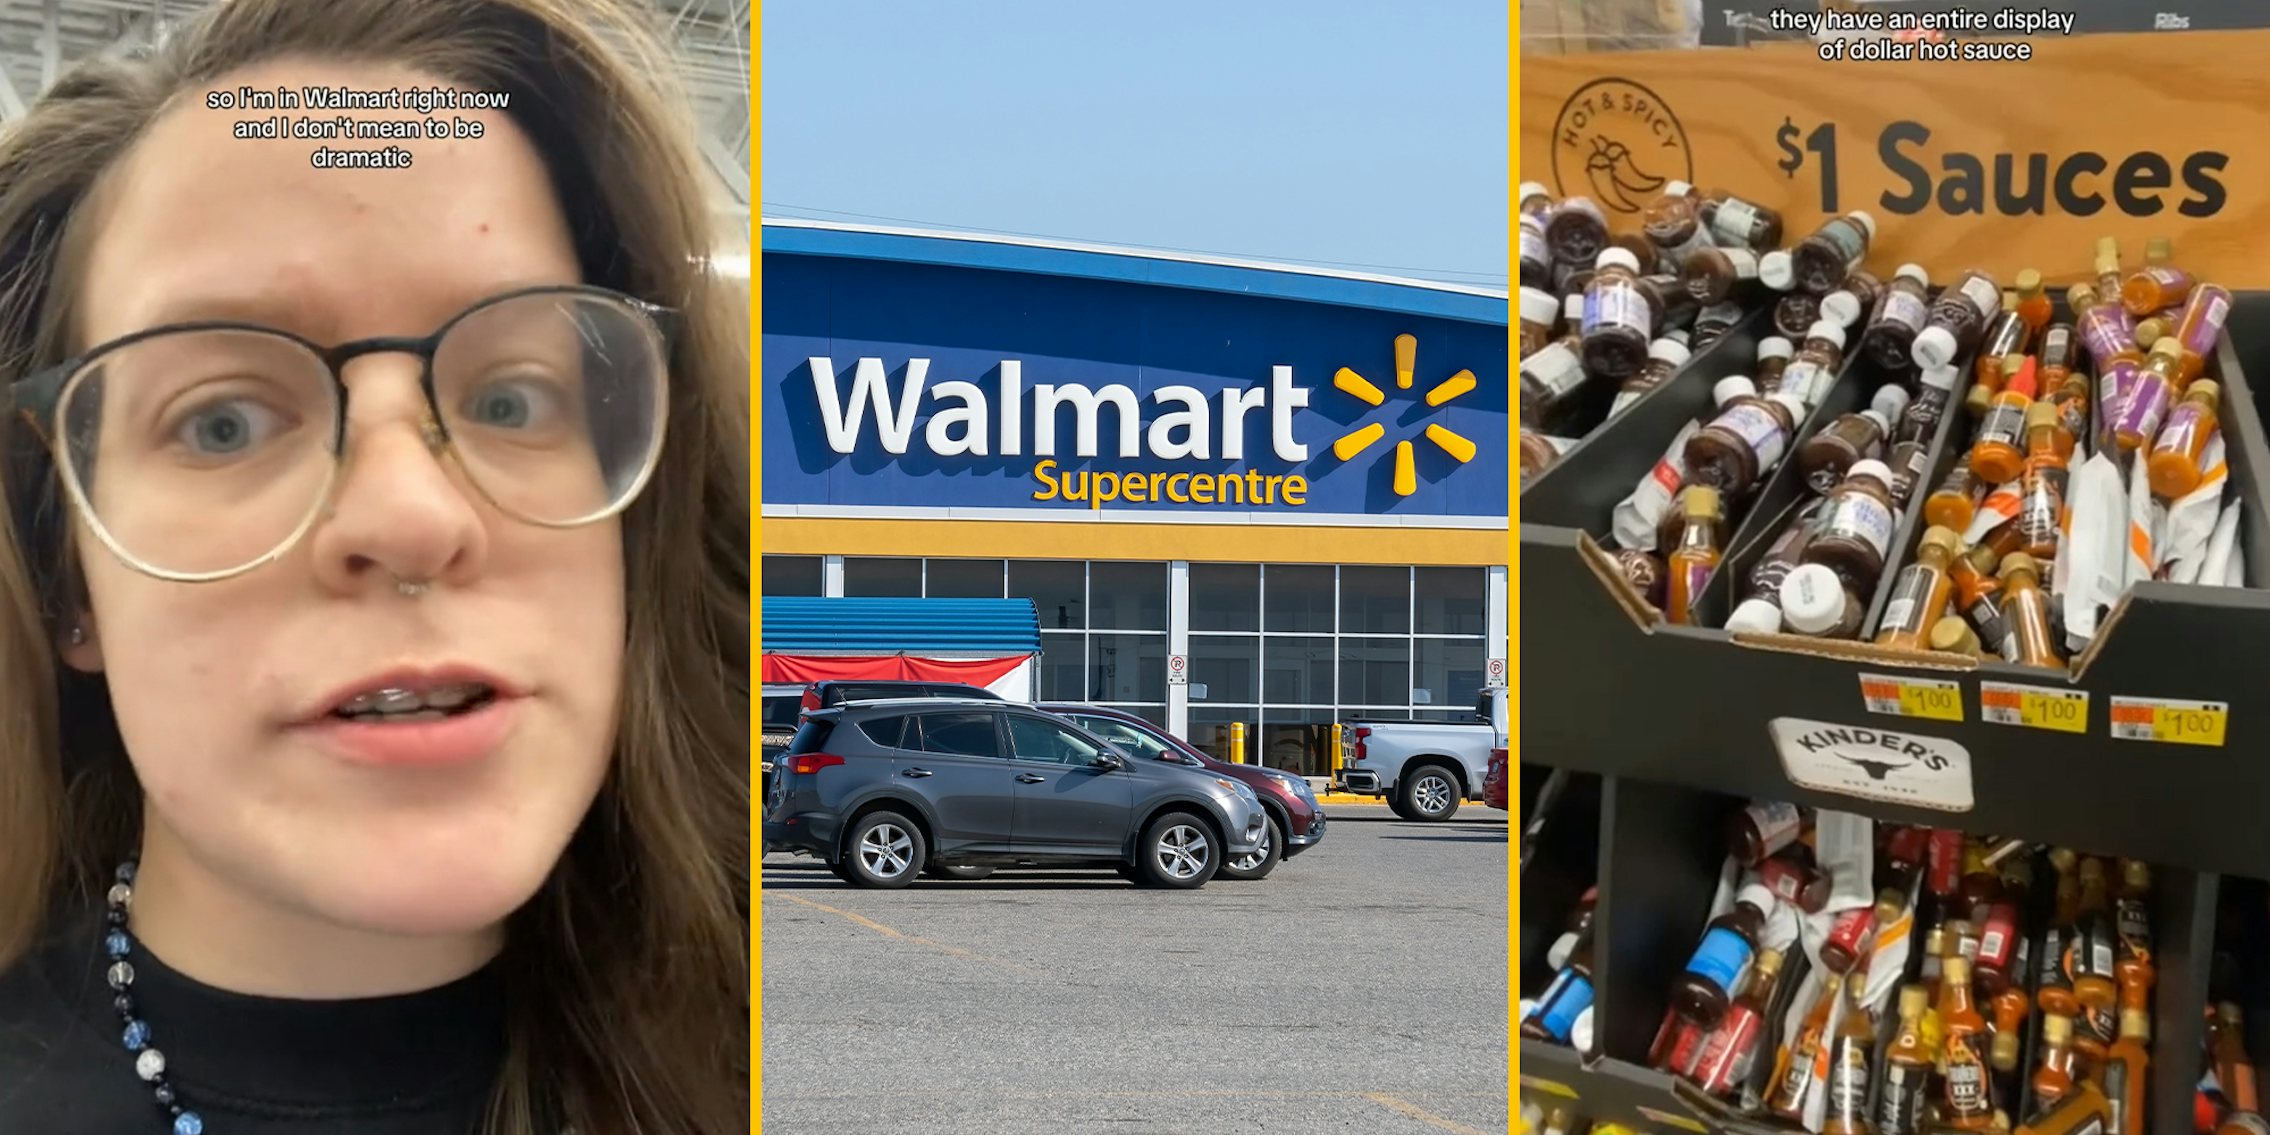 Walmart Customer Shows You Can Buy Purse Hot Sauces for $1